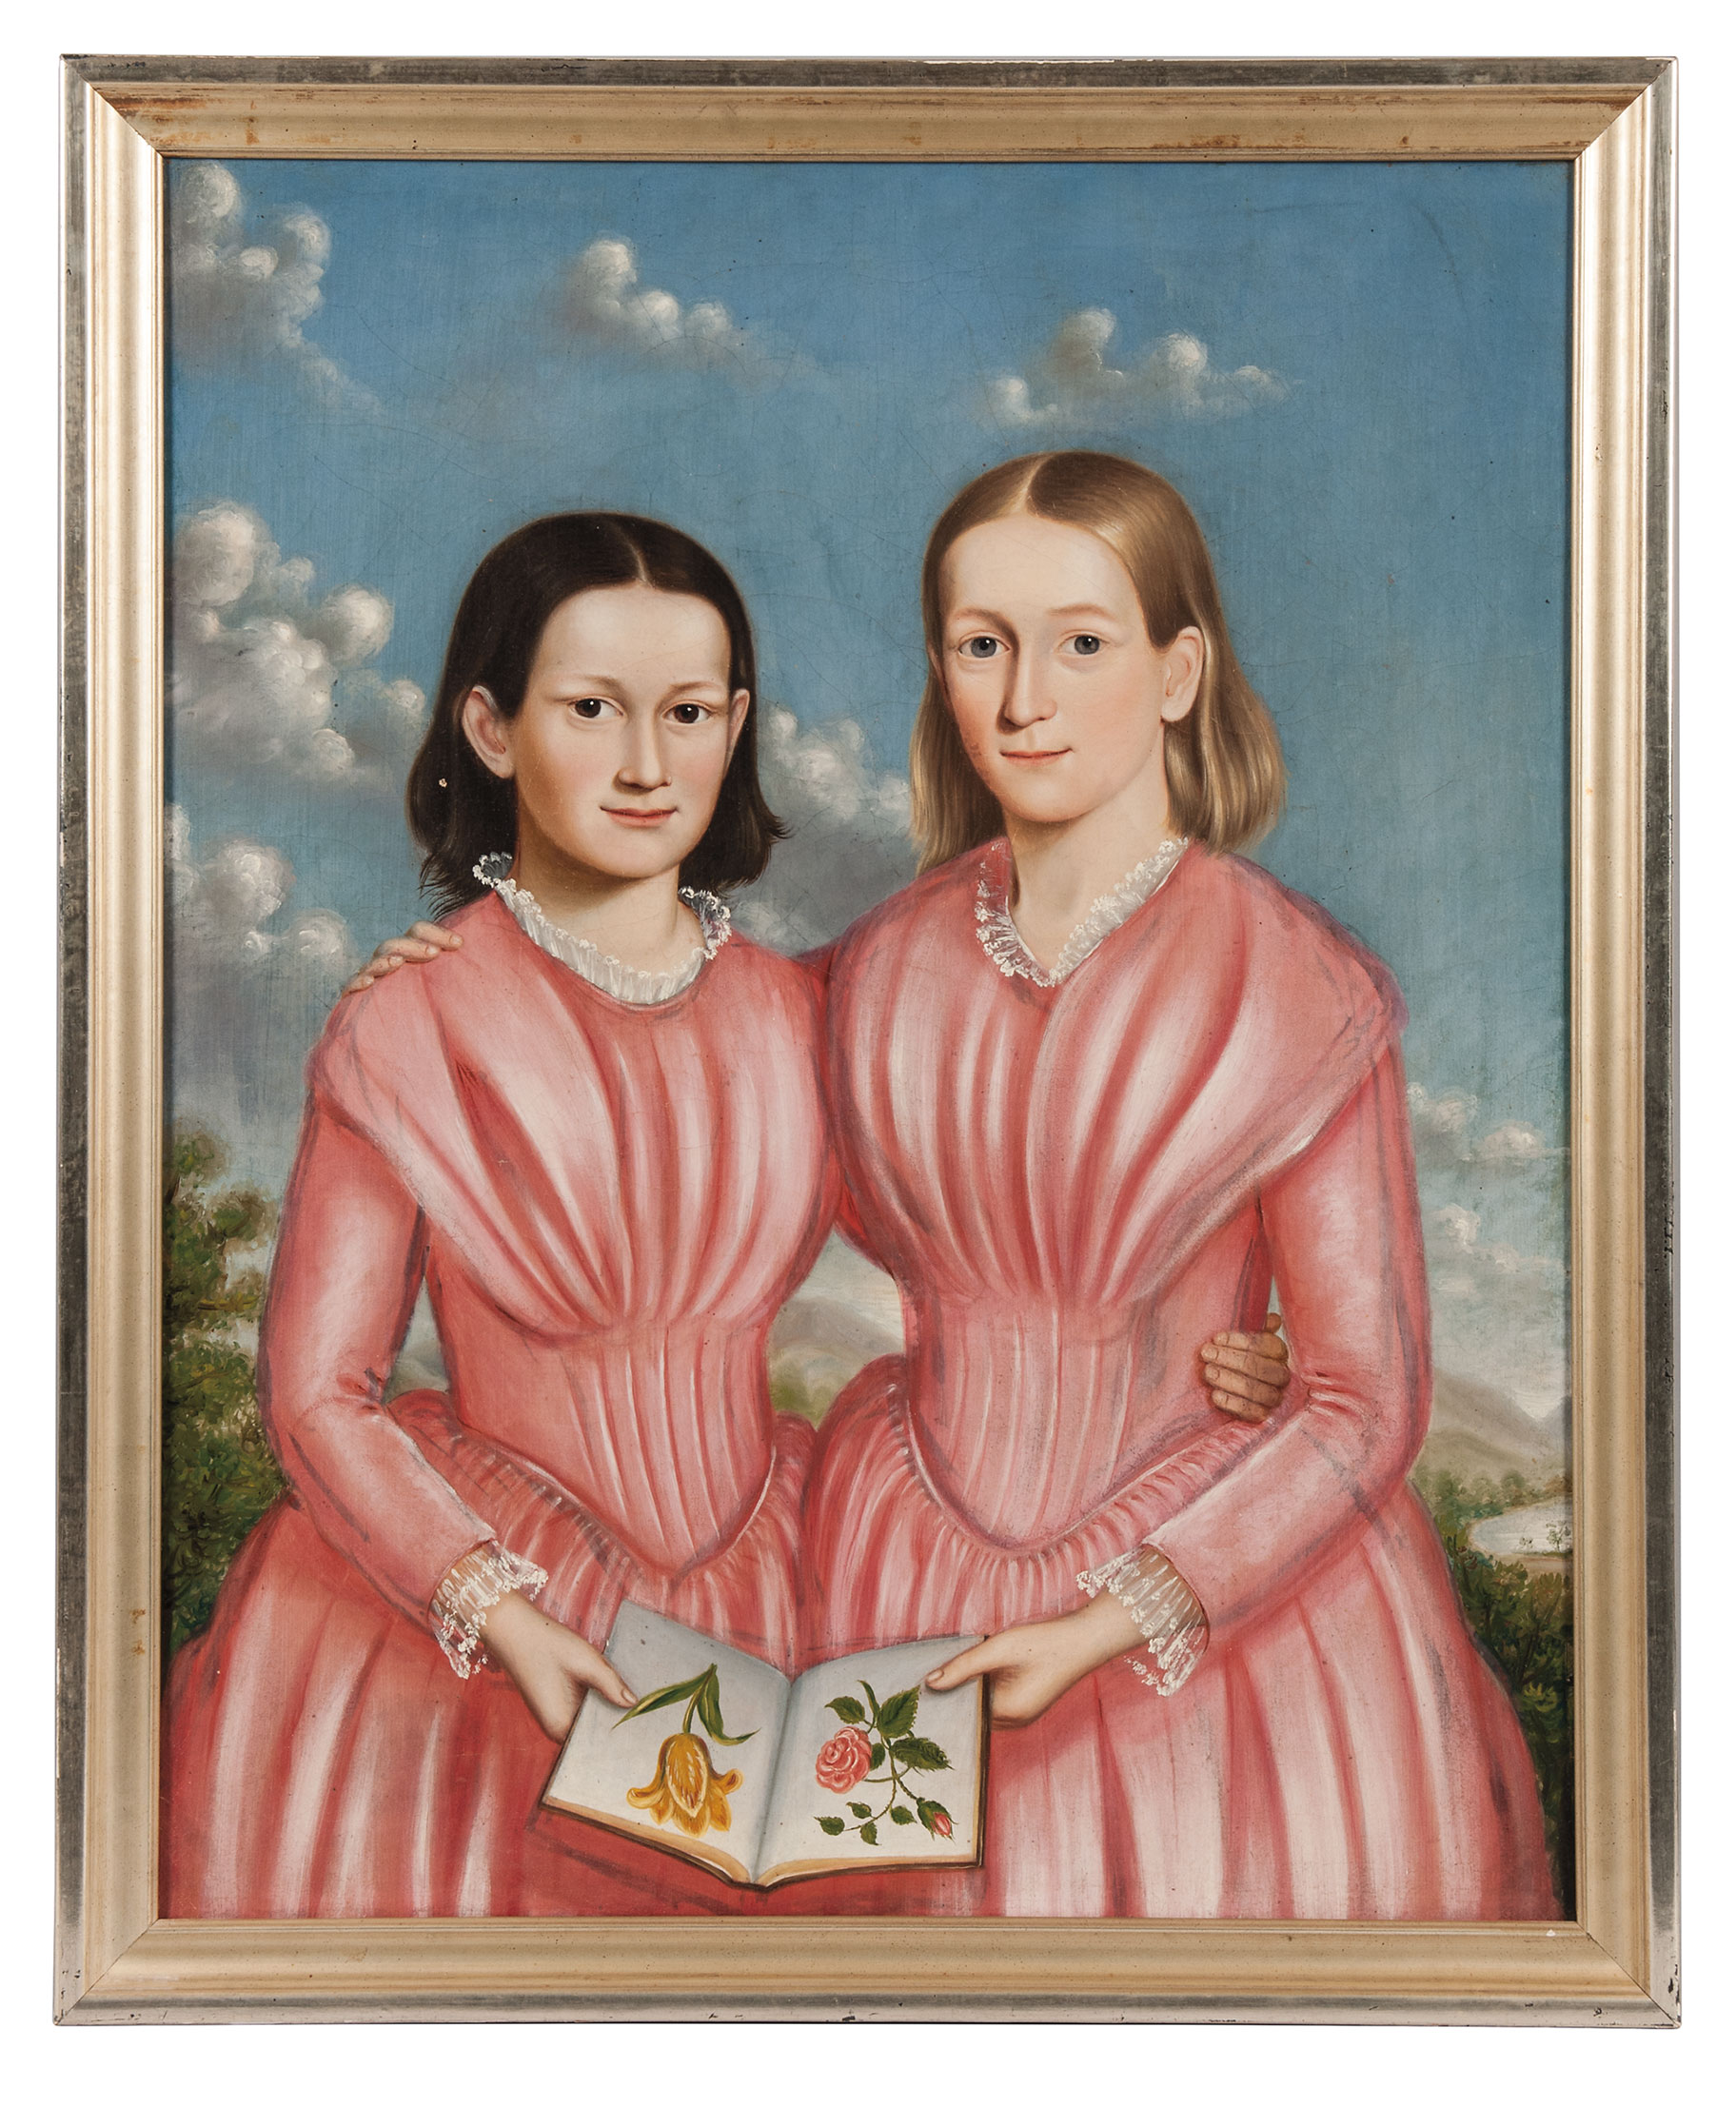 Double folk portrait of the Brackett sisters, painted in the 19th century by an unknown artist.